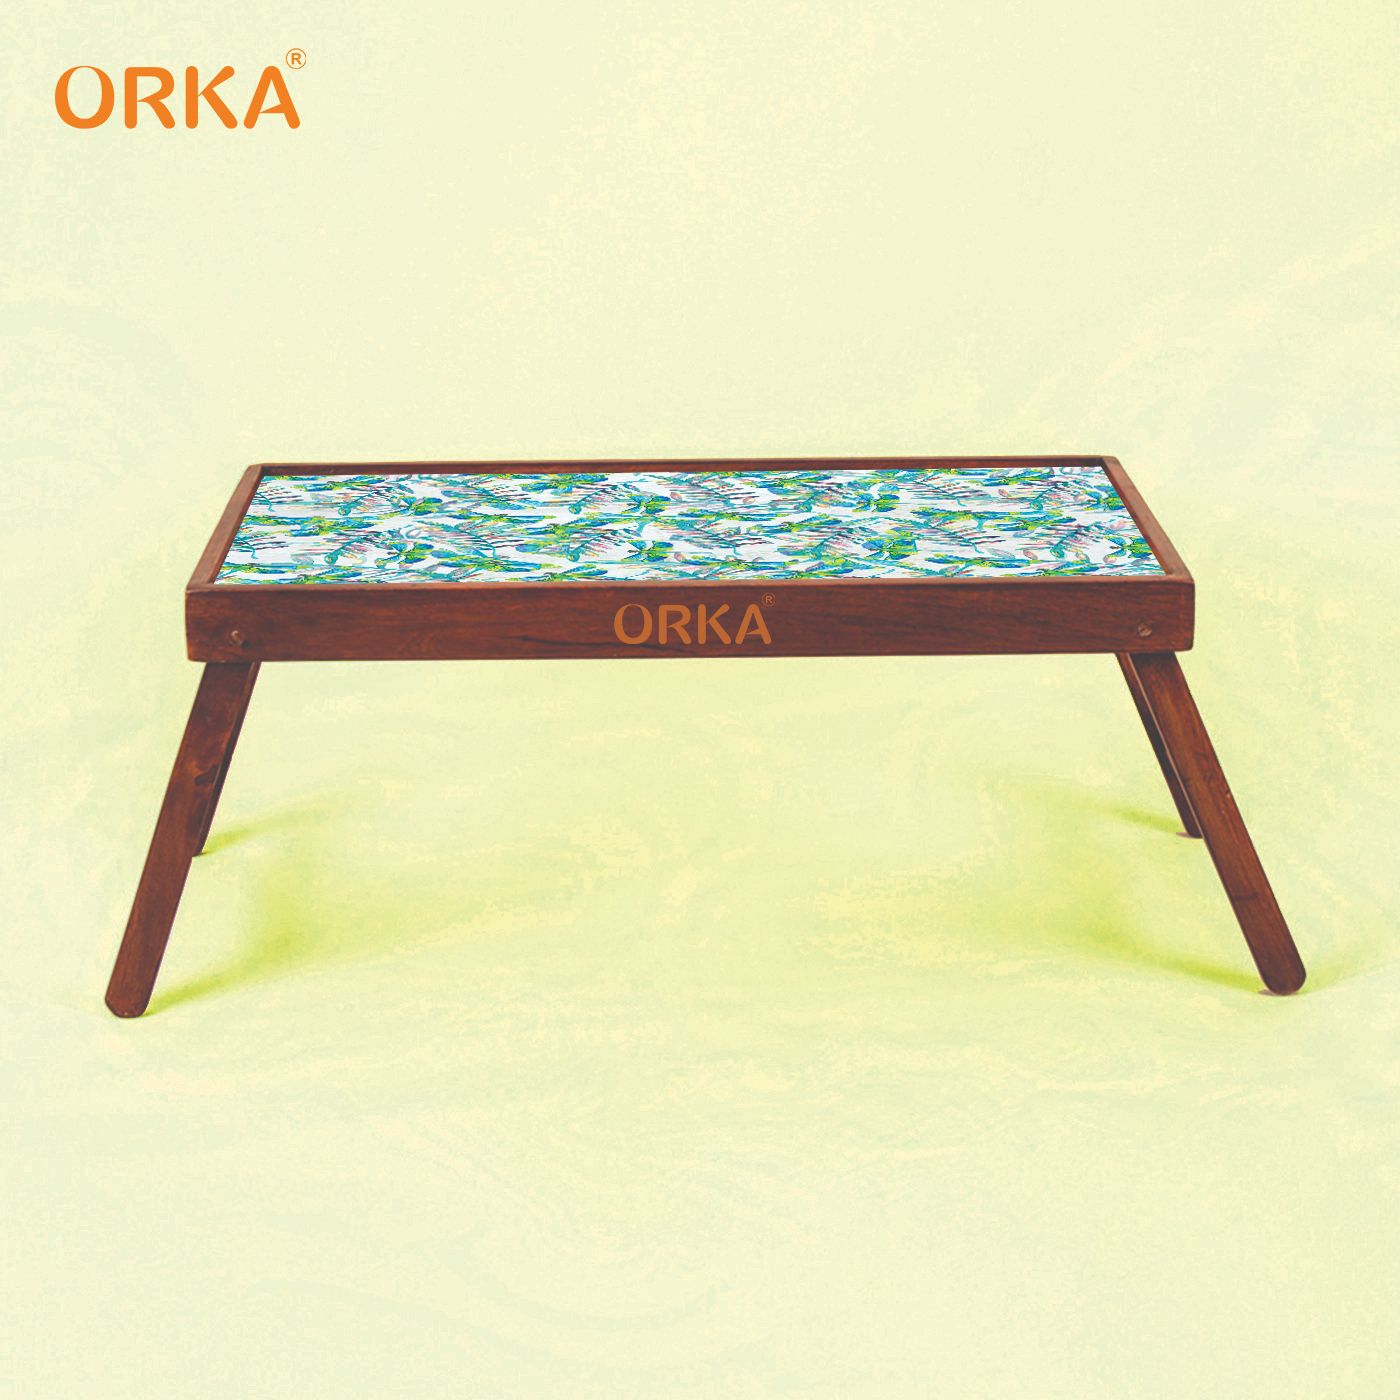 ORKA Dragonfly D1 Foldable Pine Wood Breakfast Table (Multicolor)  